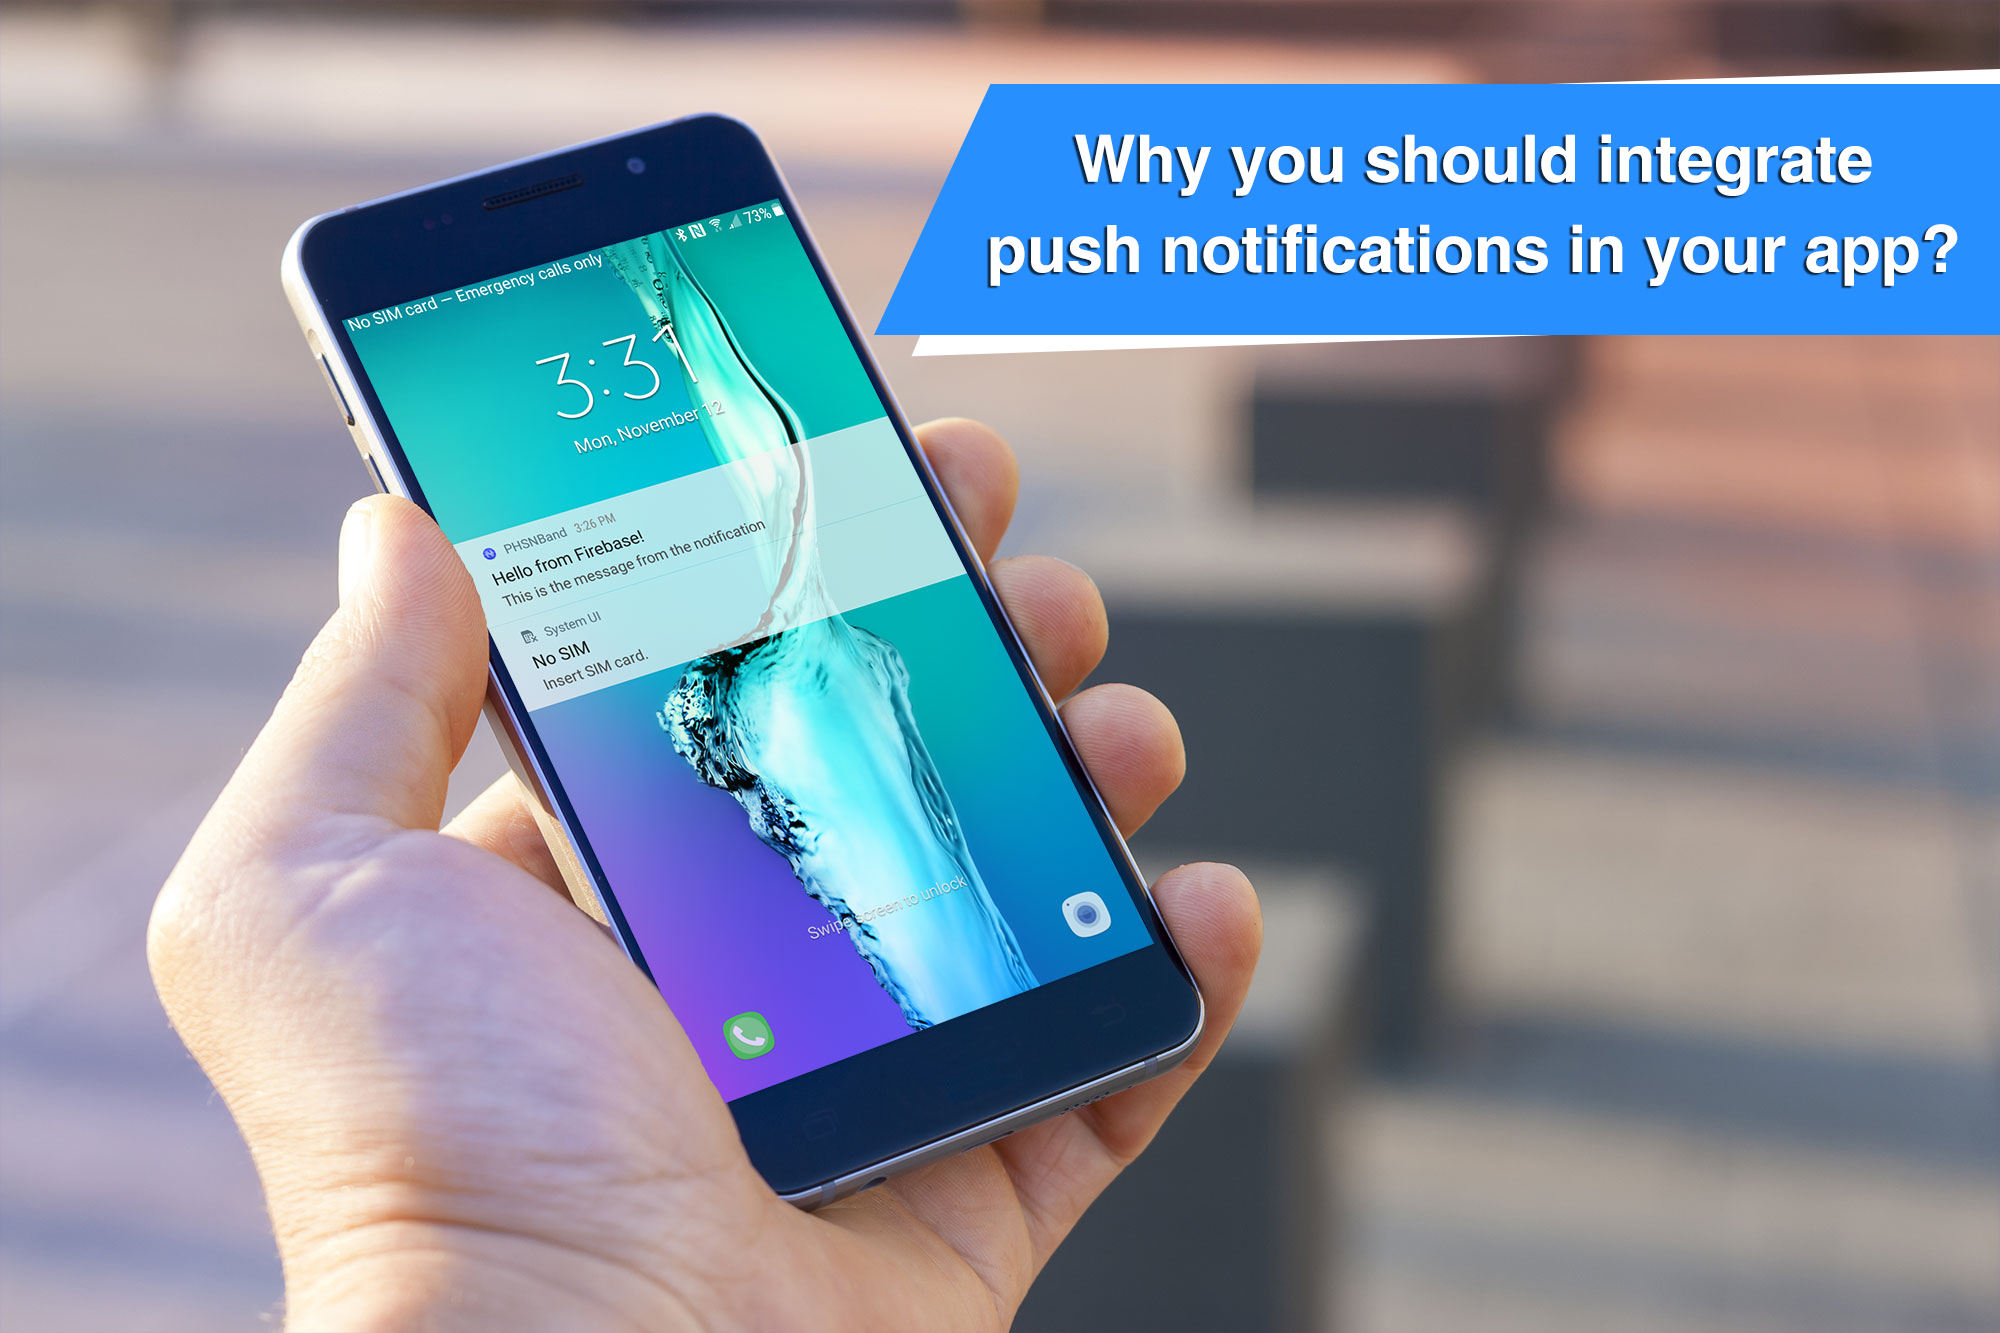 push notifications in your application